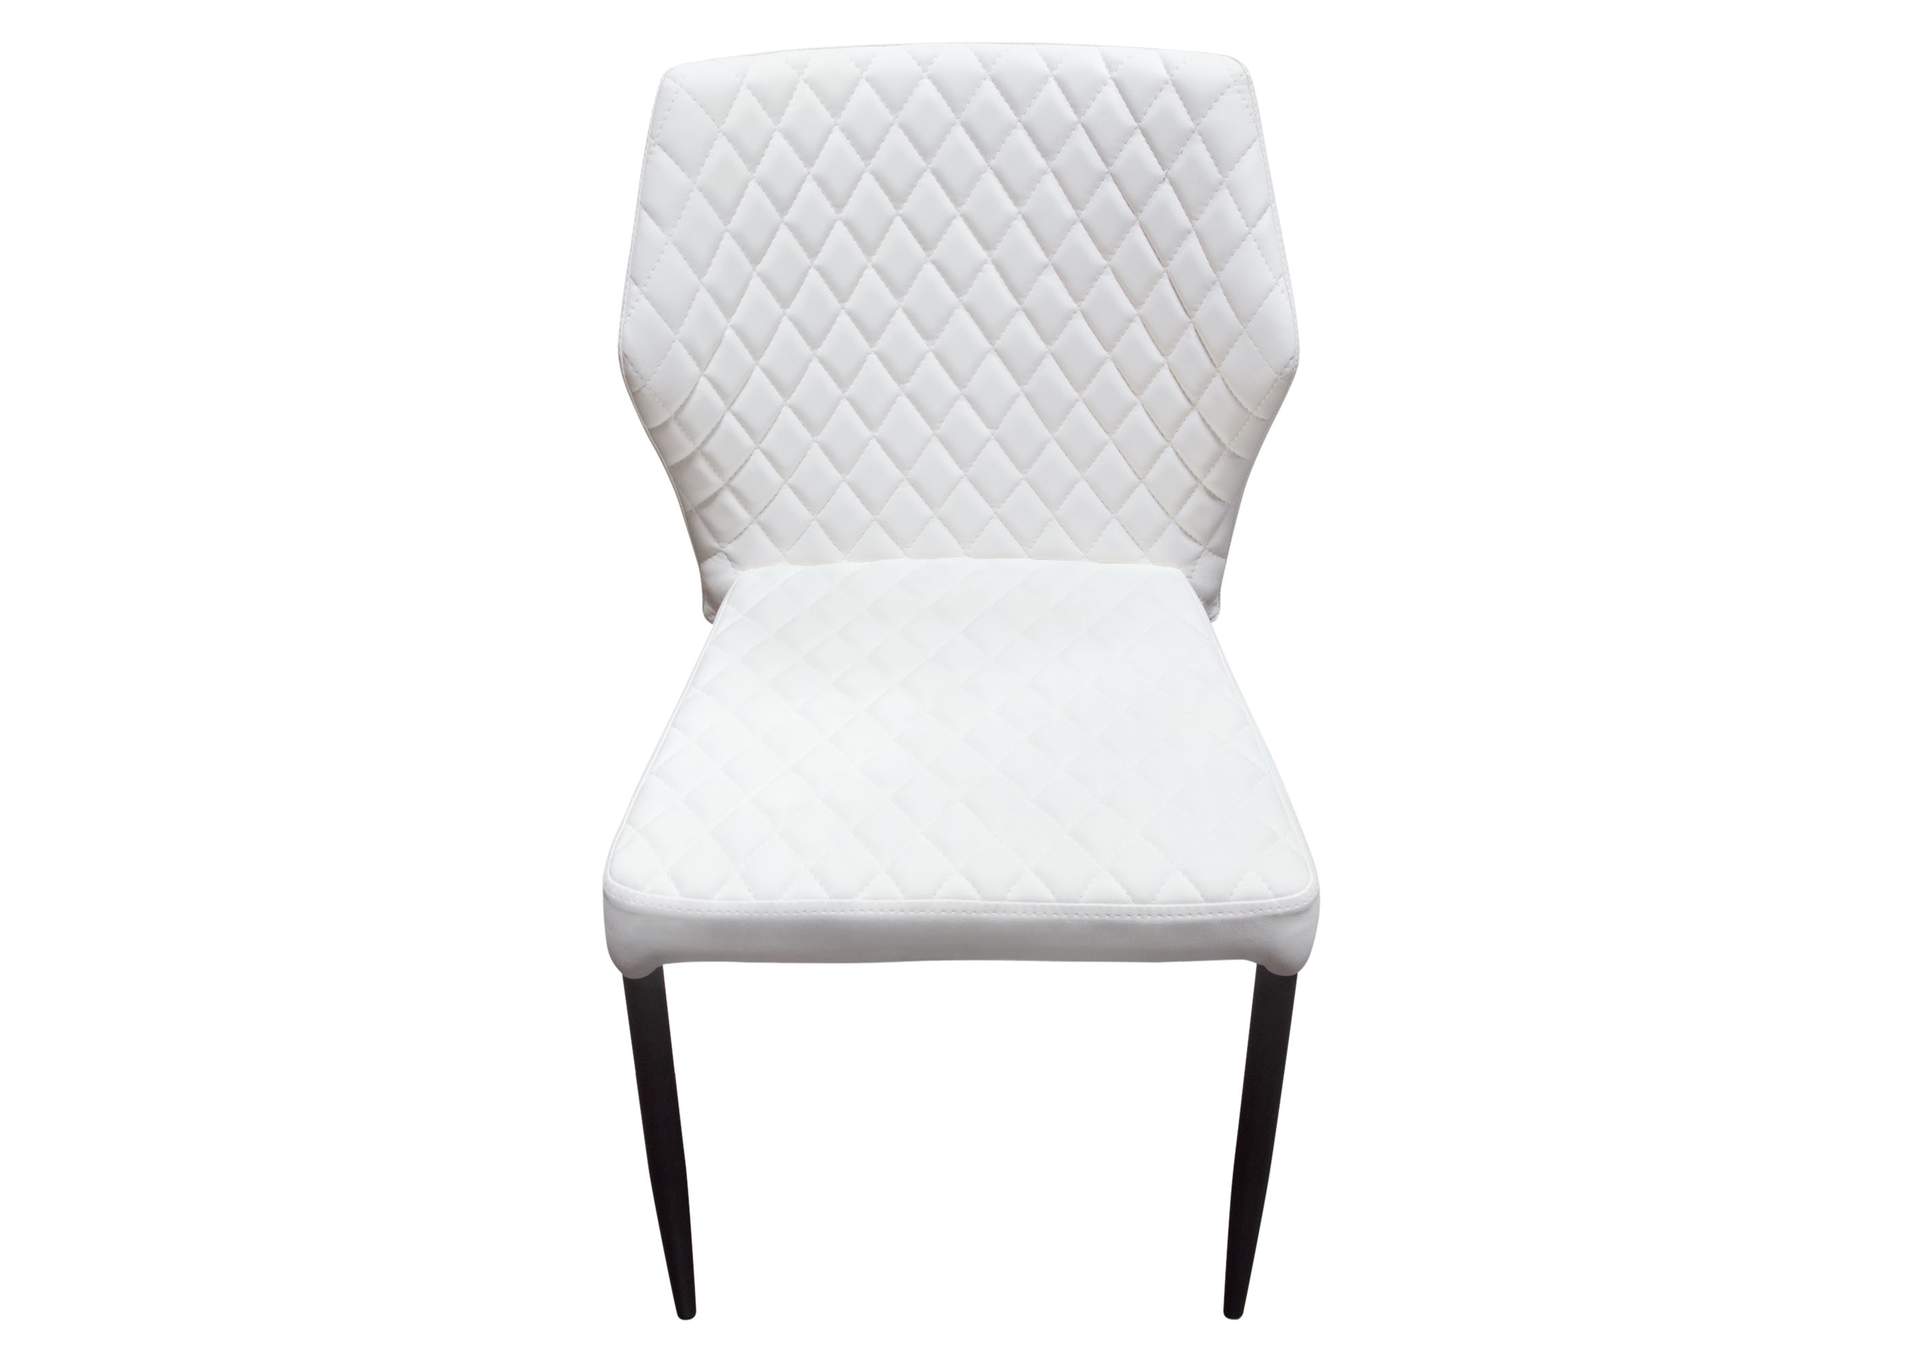 Milo 4-Pack Dining Chairs in White Diamond Tufted Leatherette with Black Powder Coat Legs by Diamond Sofa,Diamond Sofa